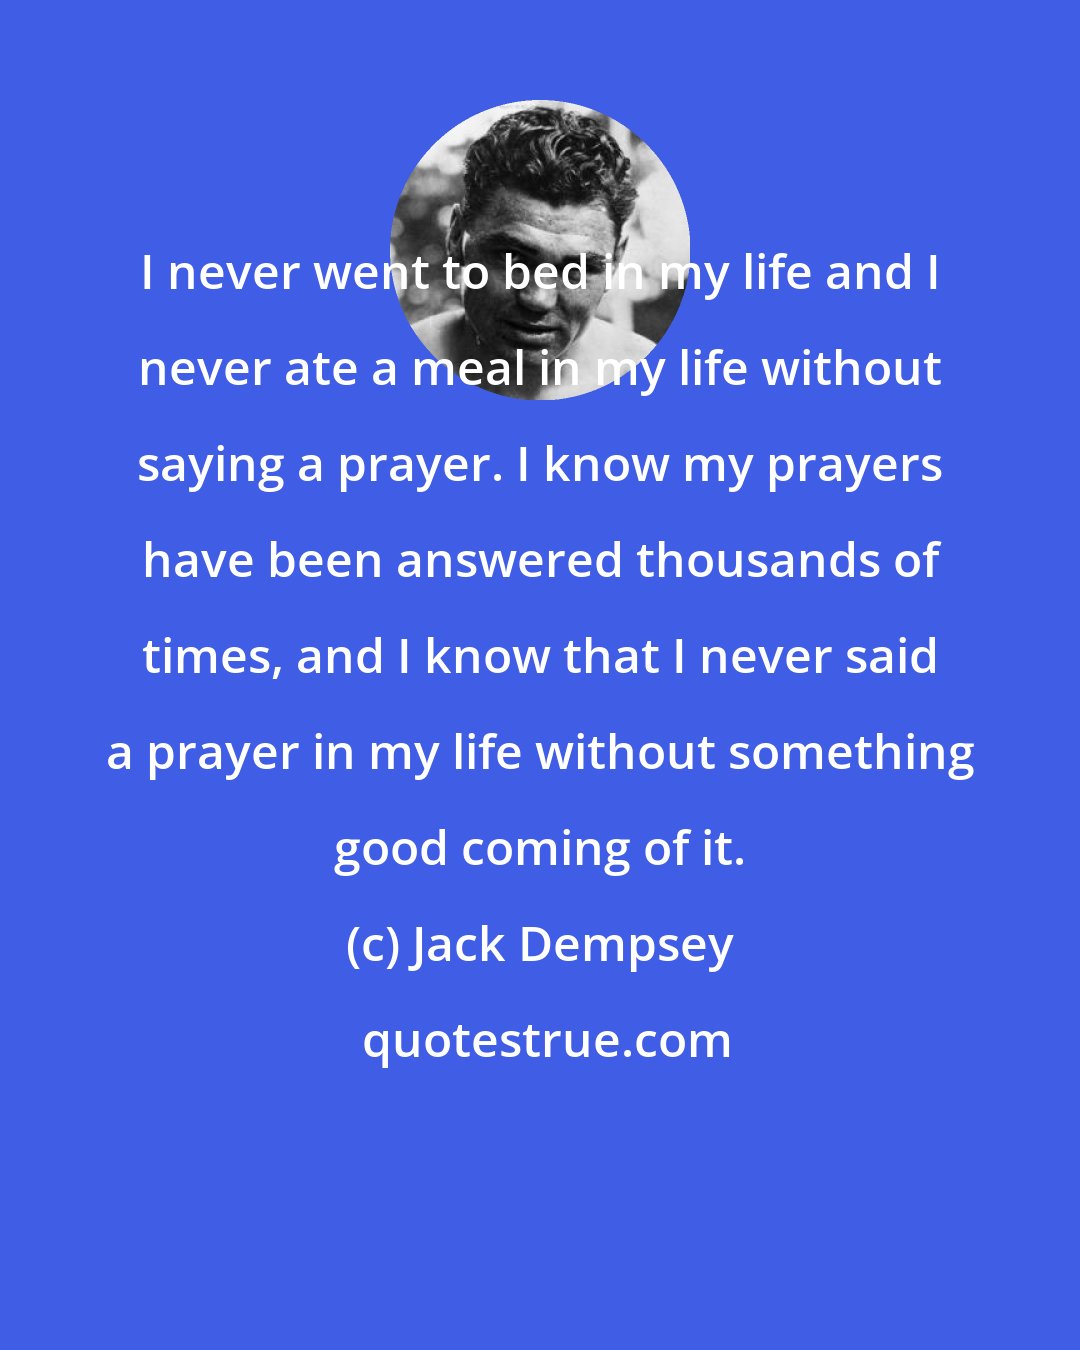 Jack Dempsey: I never went to bed in my life and I never ate a meal in my life without saying a prayer. I know my prayers have been answered thousands of times, and I know that I never said a prayer in my life without something good coming of it.